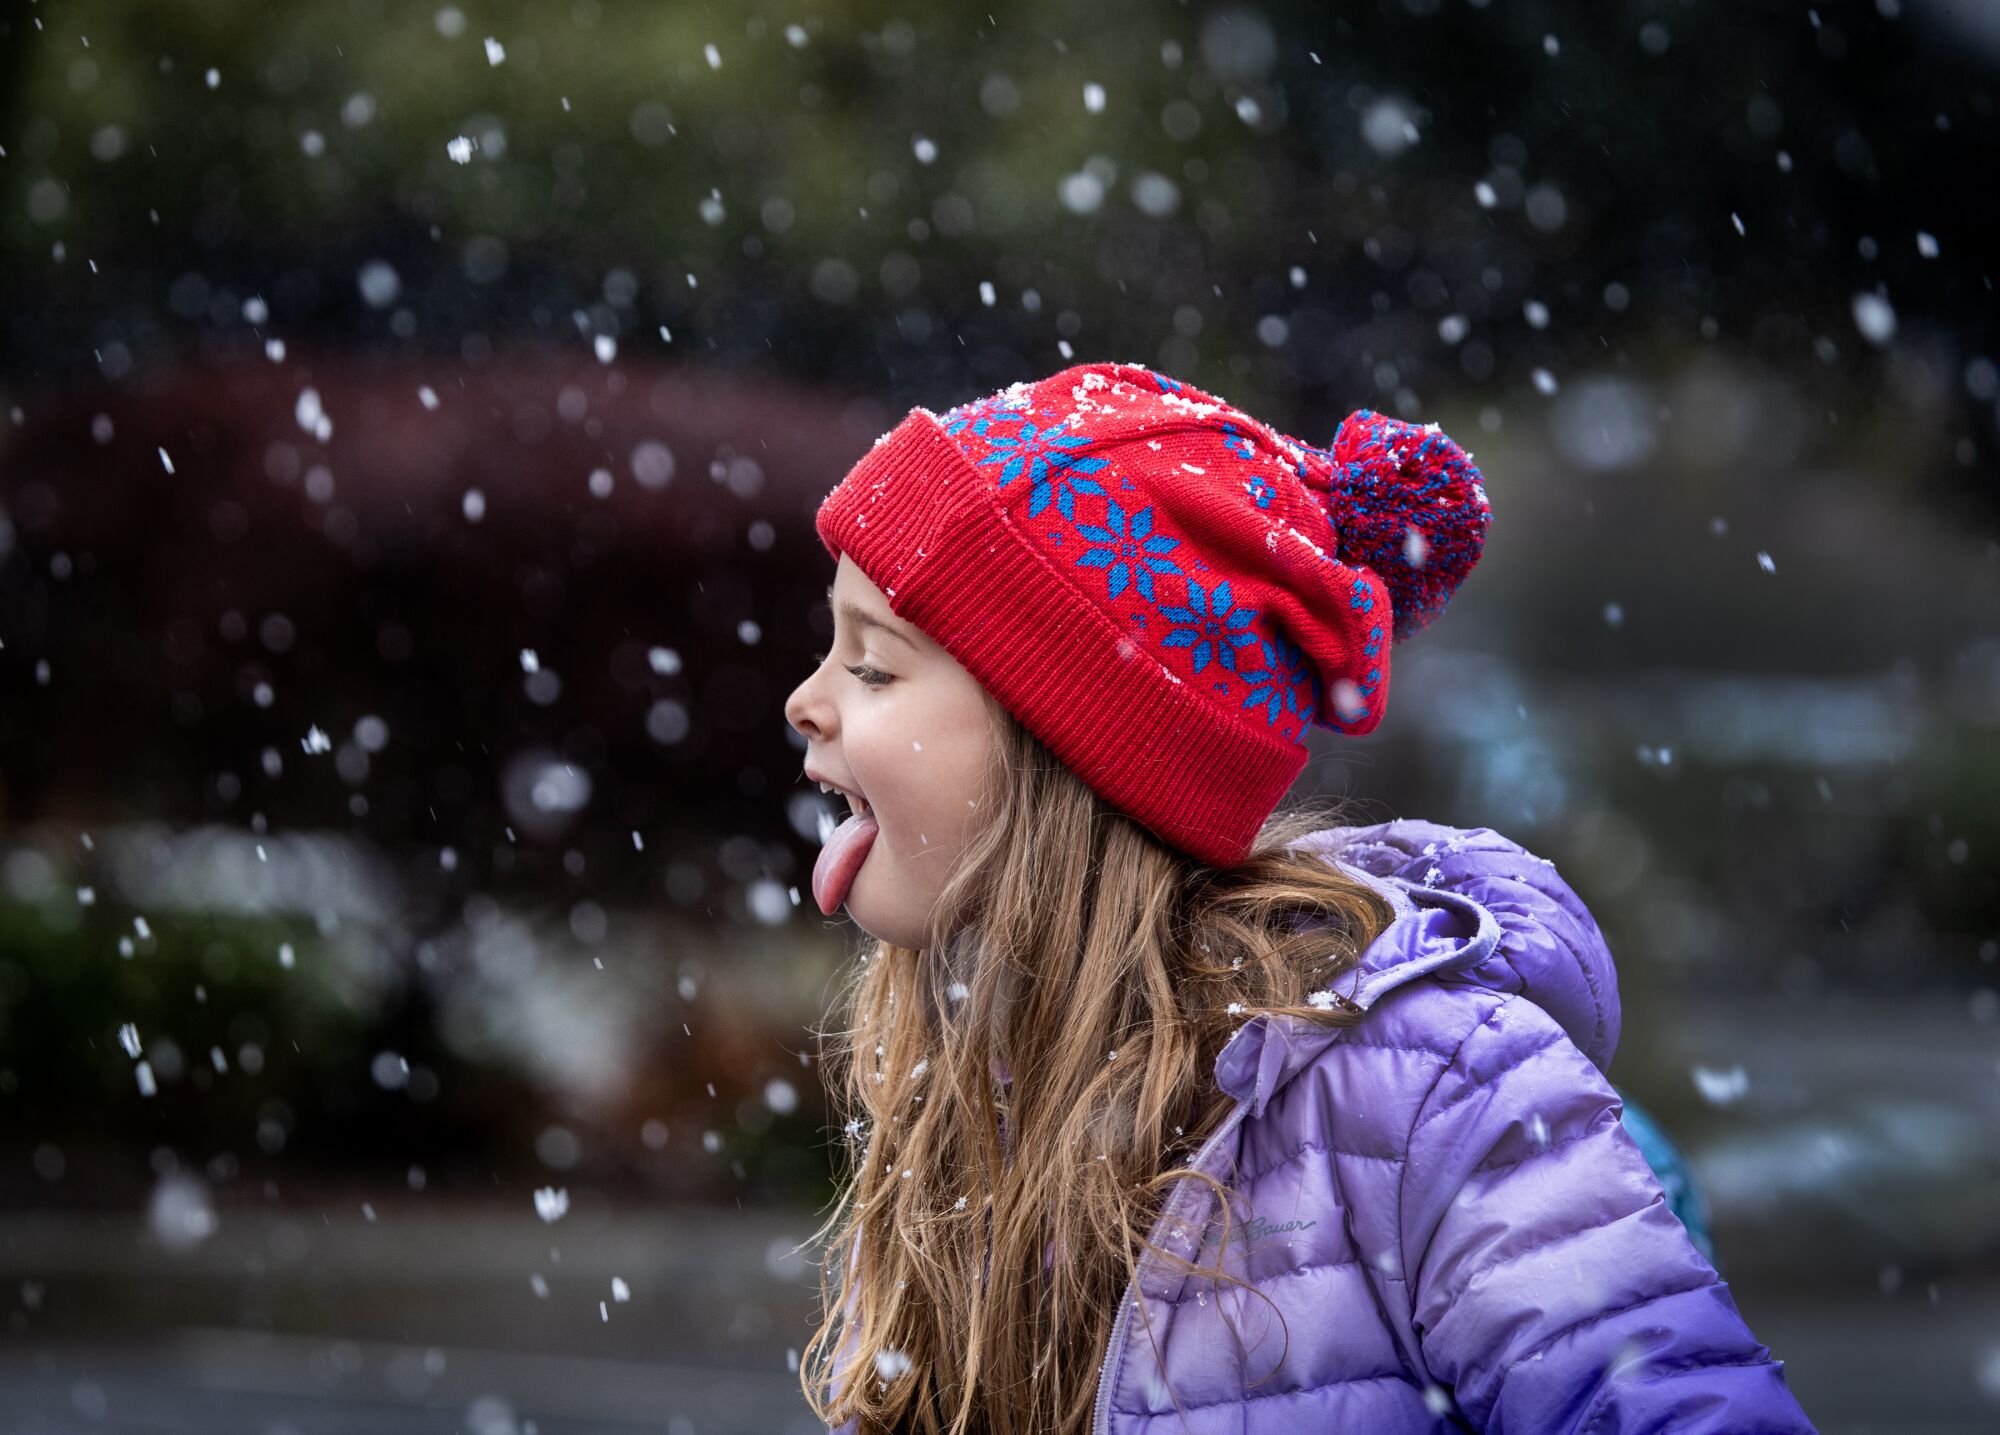 Bailey Griffin, 6, of Yucaipa, catches snow on her tongue amidst a rare snow storm in Southern California